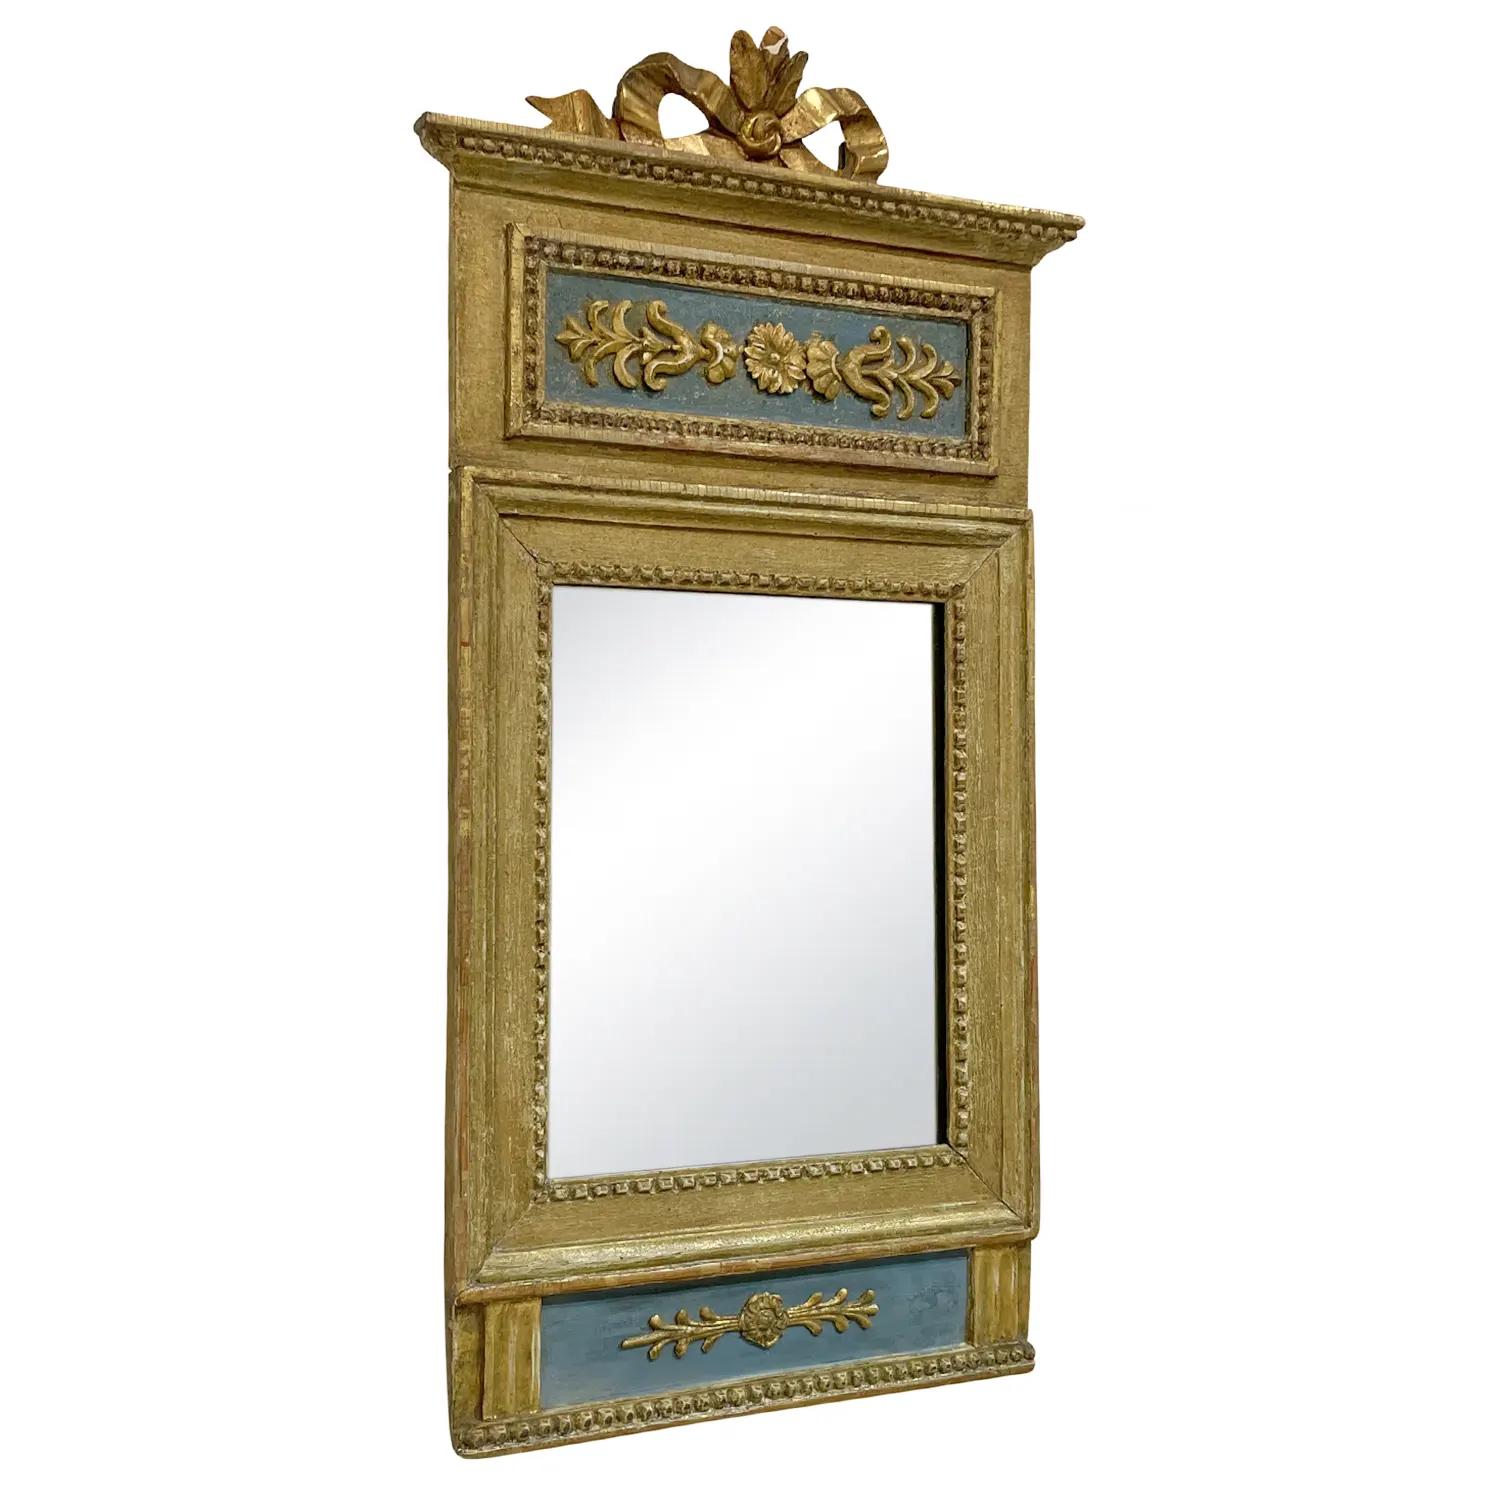 A gold, antique Swedish Gustavian wall mirror made of hand carved gilded Pinewood with its original mirrored glass, in good condition. This dedicated piece was designed, produced by an unknown artist from Stockholm and it was later restored and sold